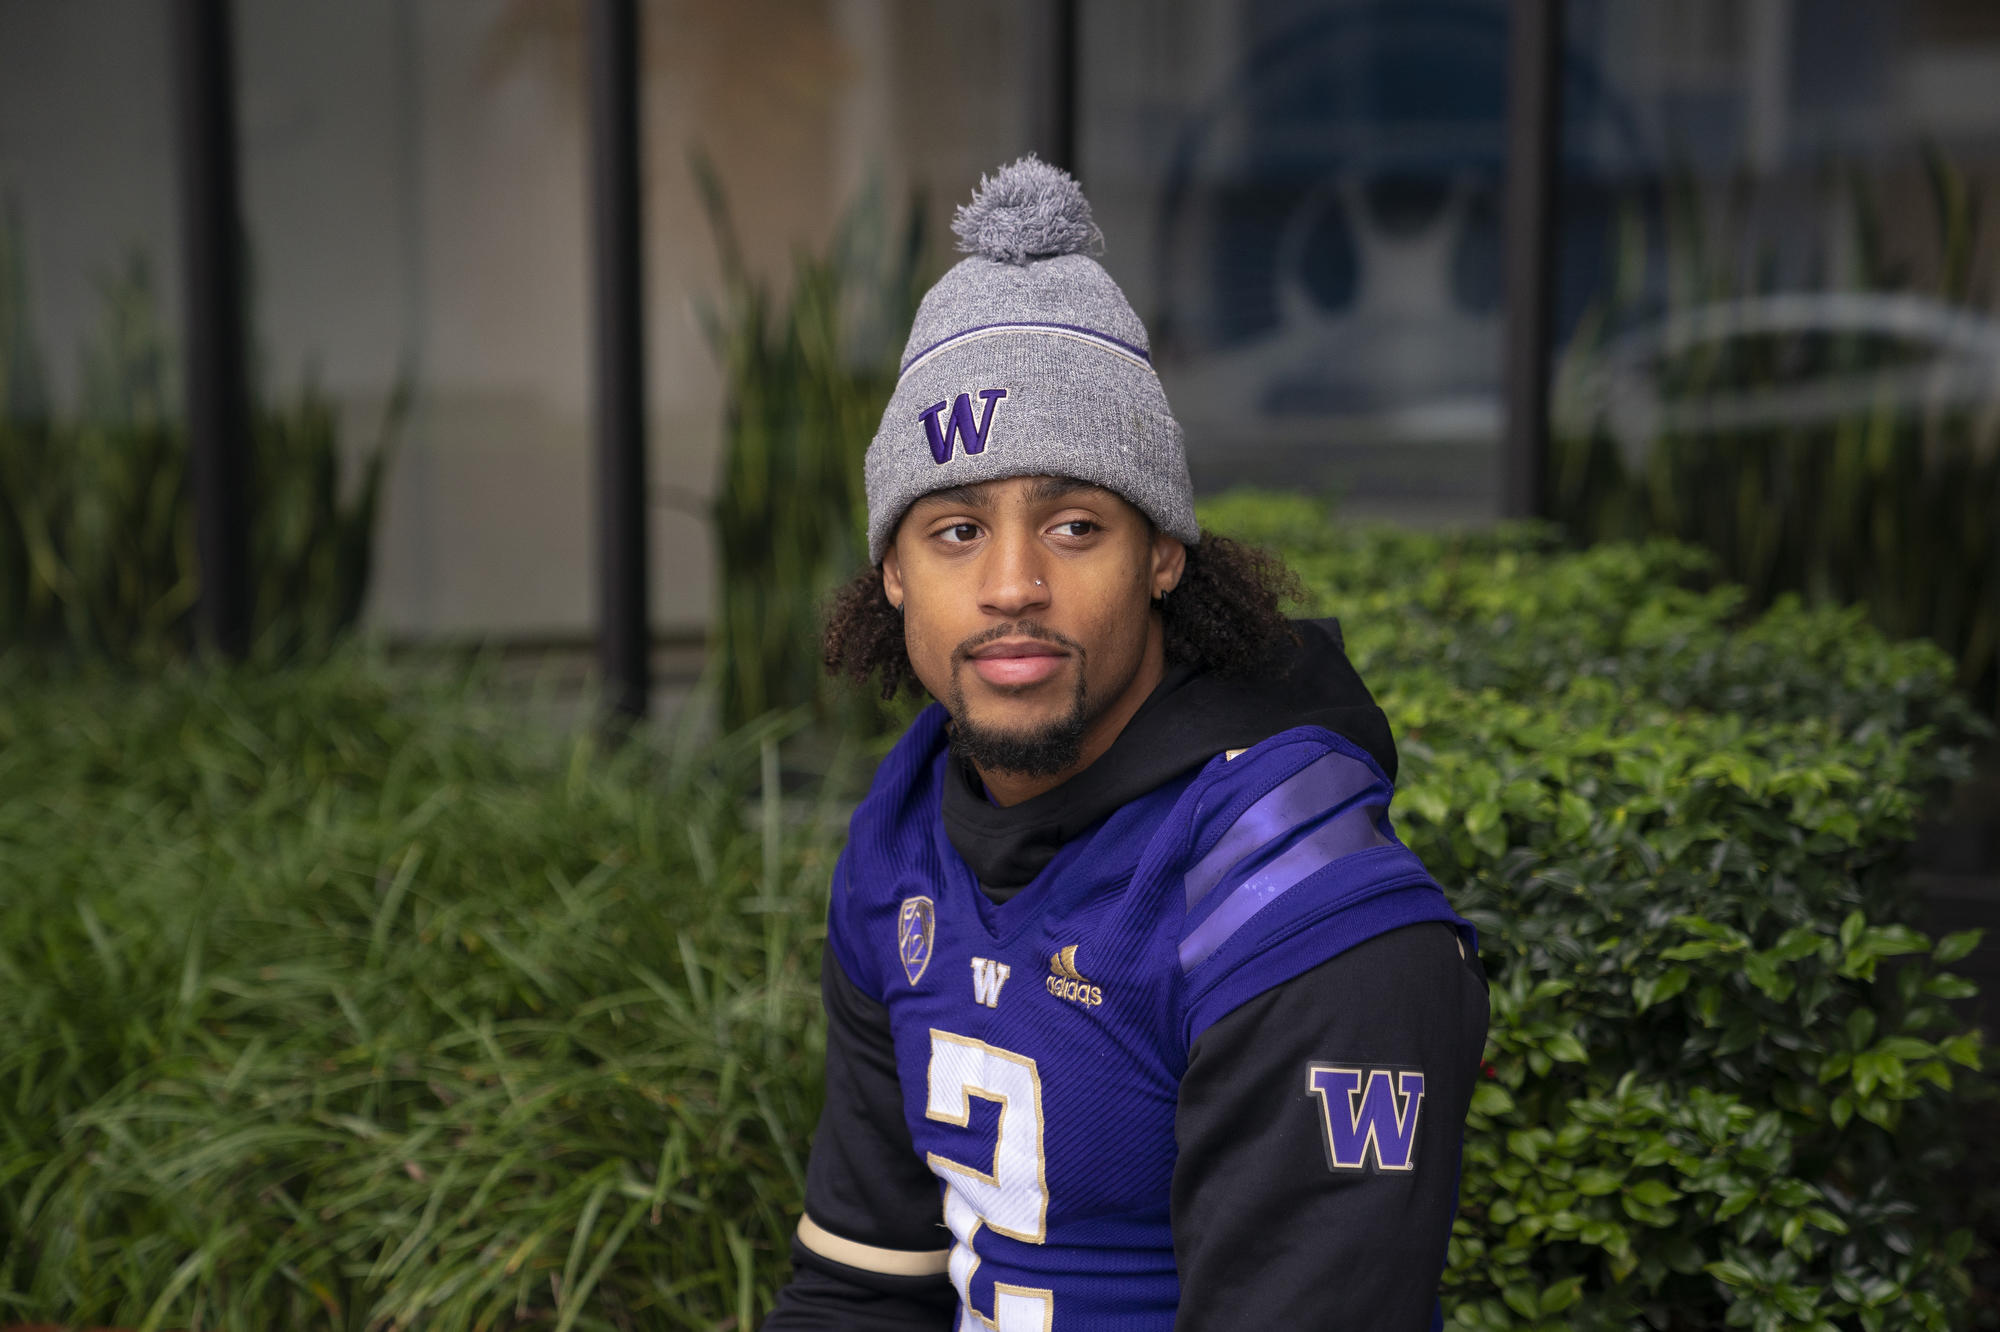 Student athletes at UW can now earn money. But it's complicated | Crosscut